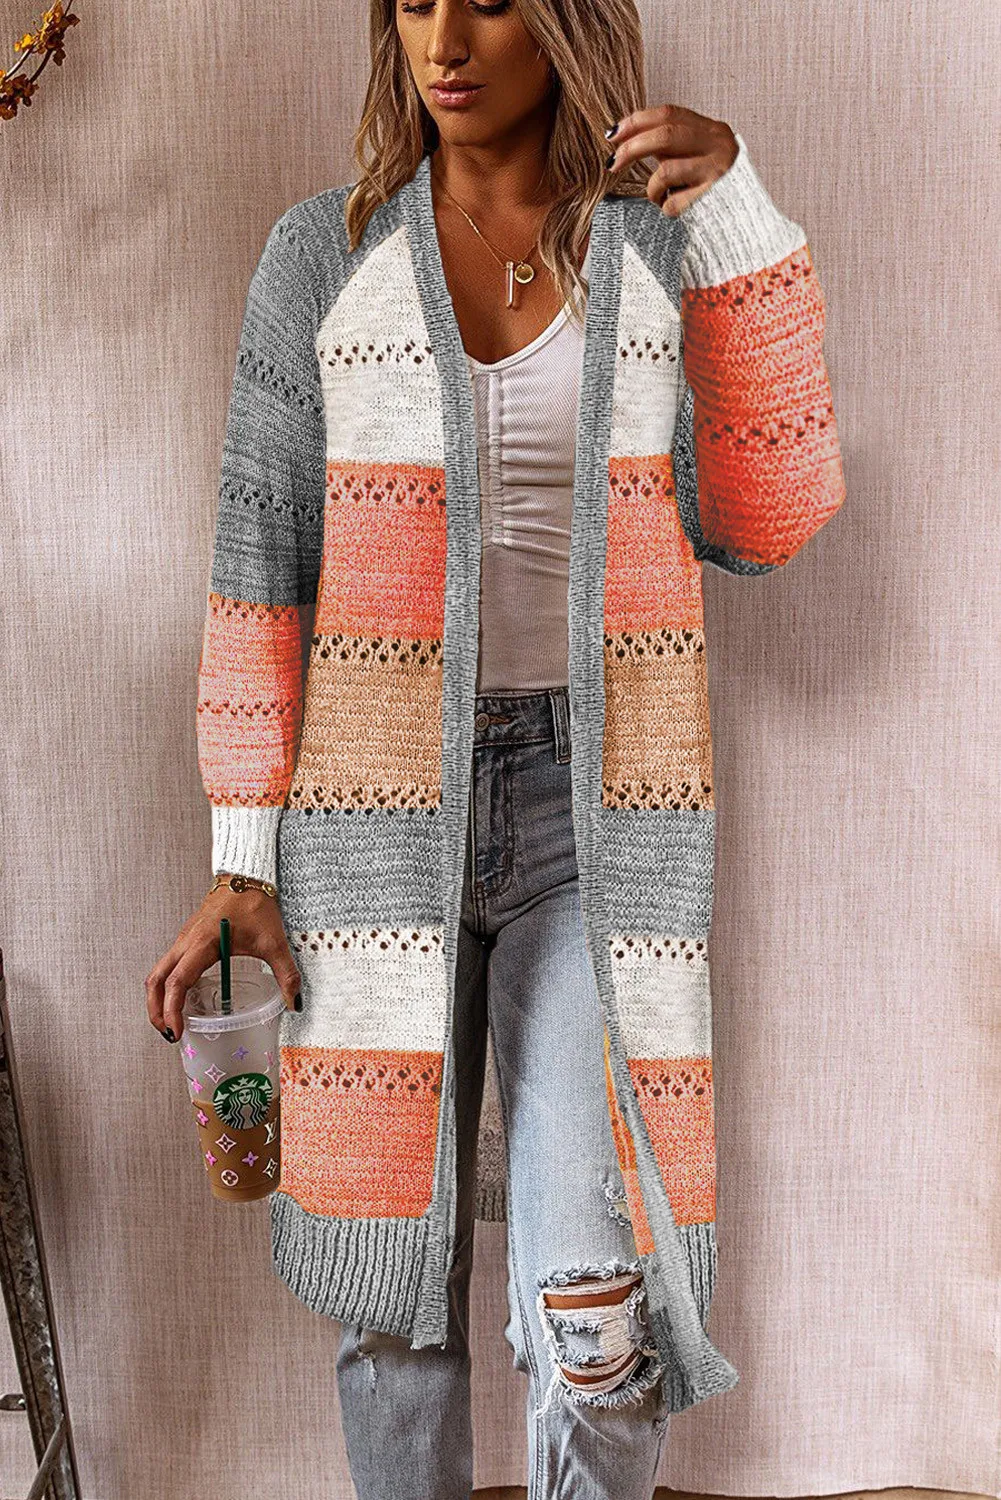 2023 New Autumn and Winter New Cardigan Sweaters for Women Print Long Sleeve Knitter Knitted Cardigan